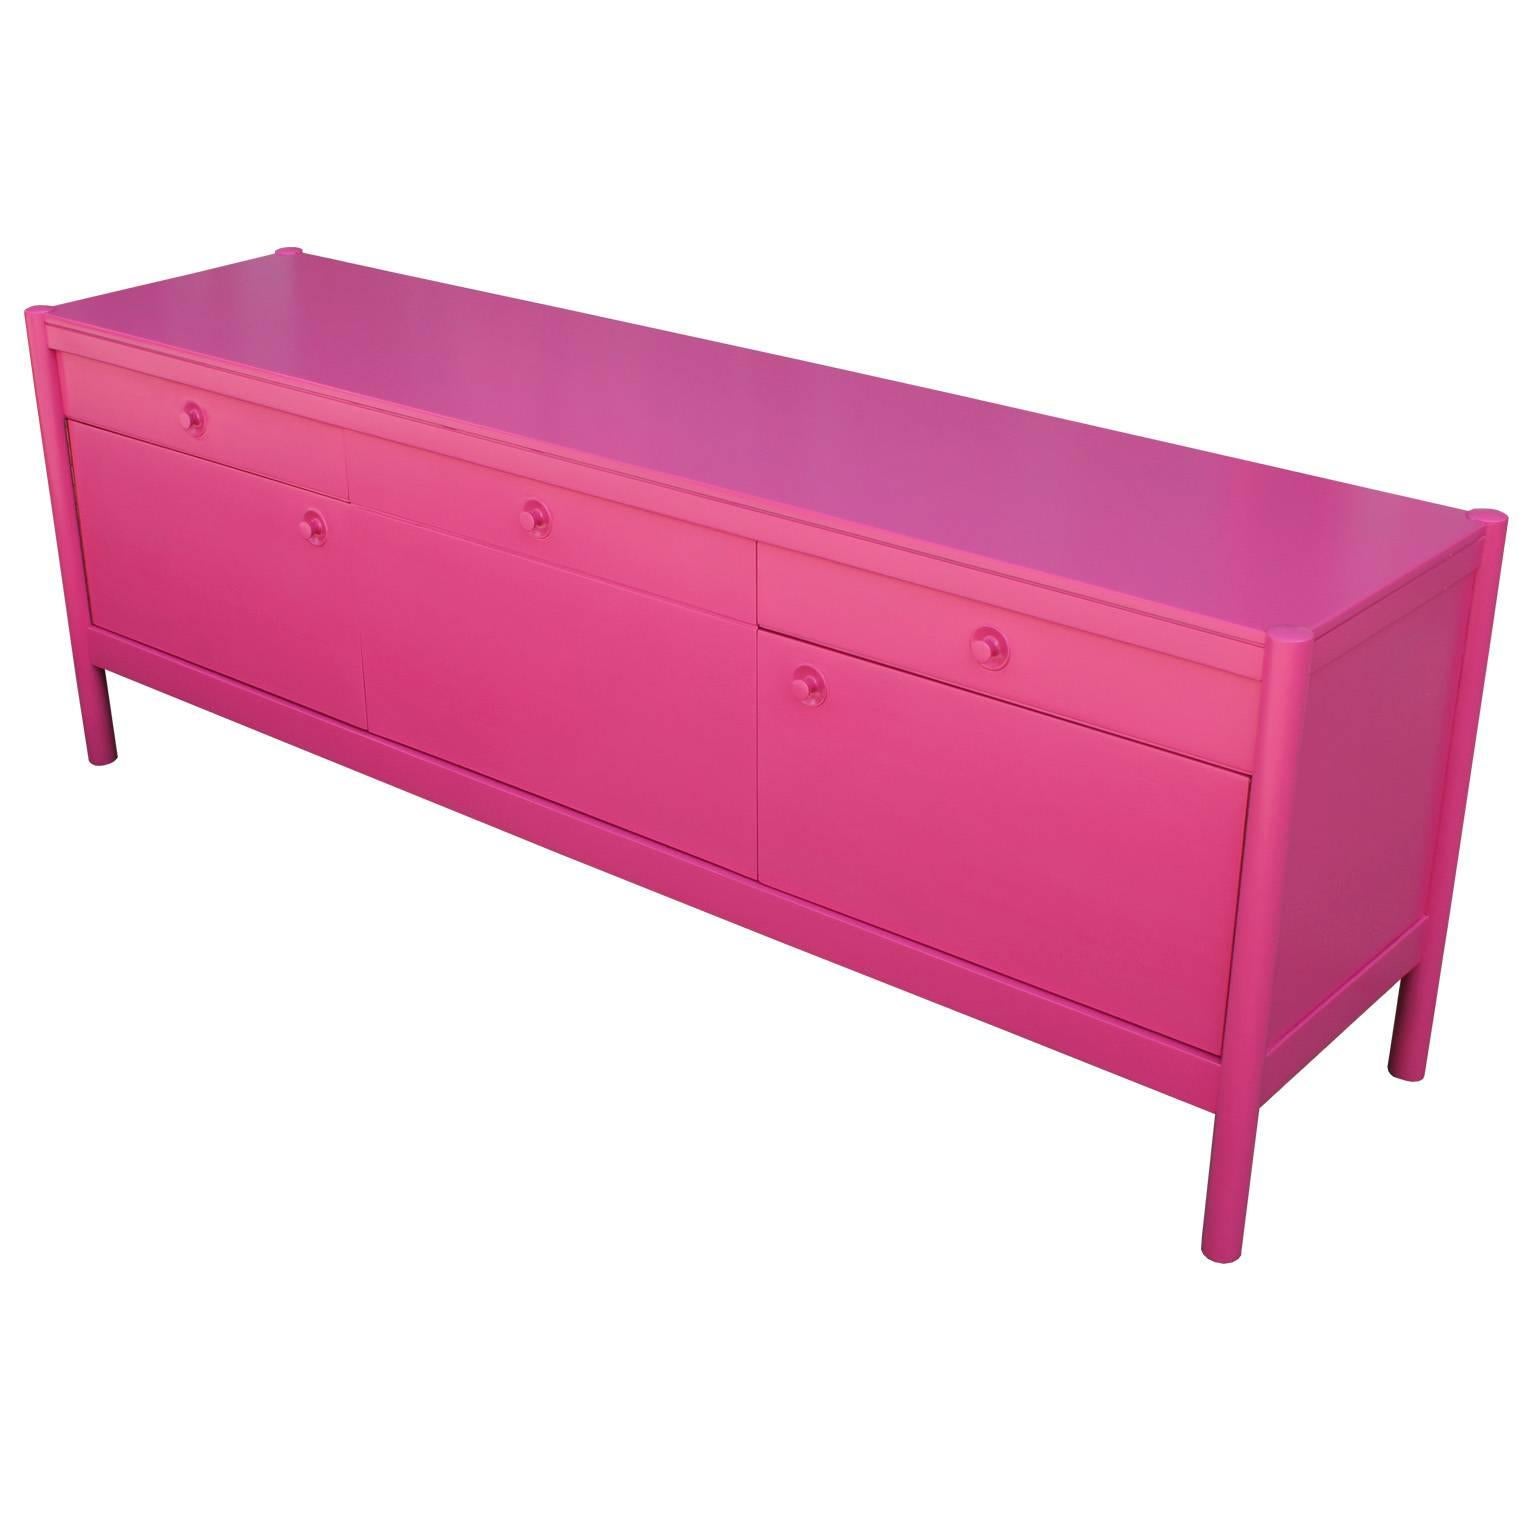 Fabulous credenza or sideboard fully finished in an ultra smooth hot pink lacquer. Left door reveals open cabinet space. Middle door drops down to reveal a single shelf. Right door opens to a single shelf. Two drawers provide additional storage, one